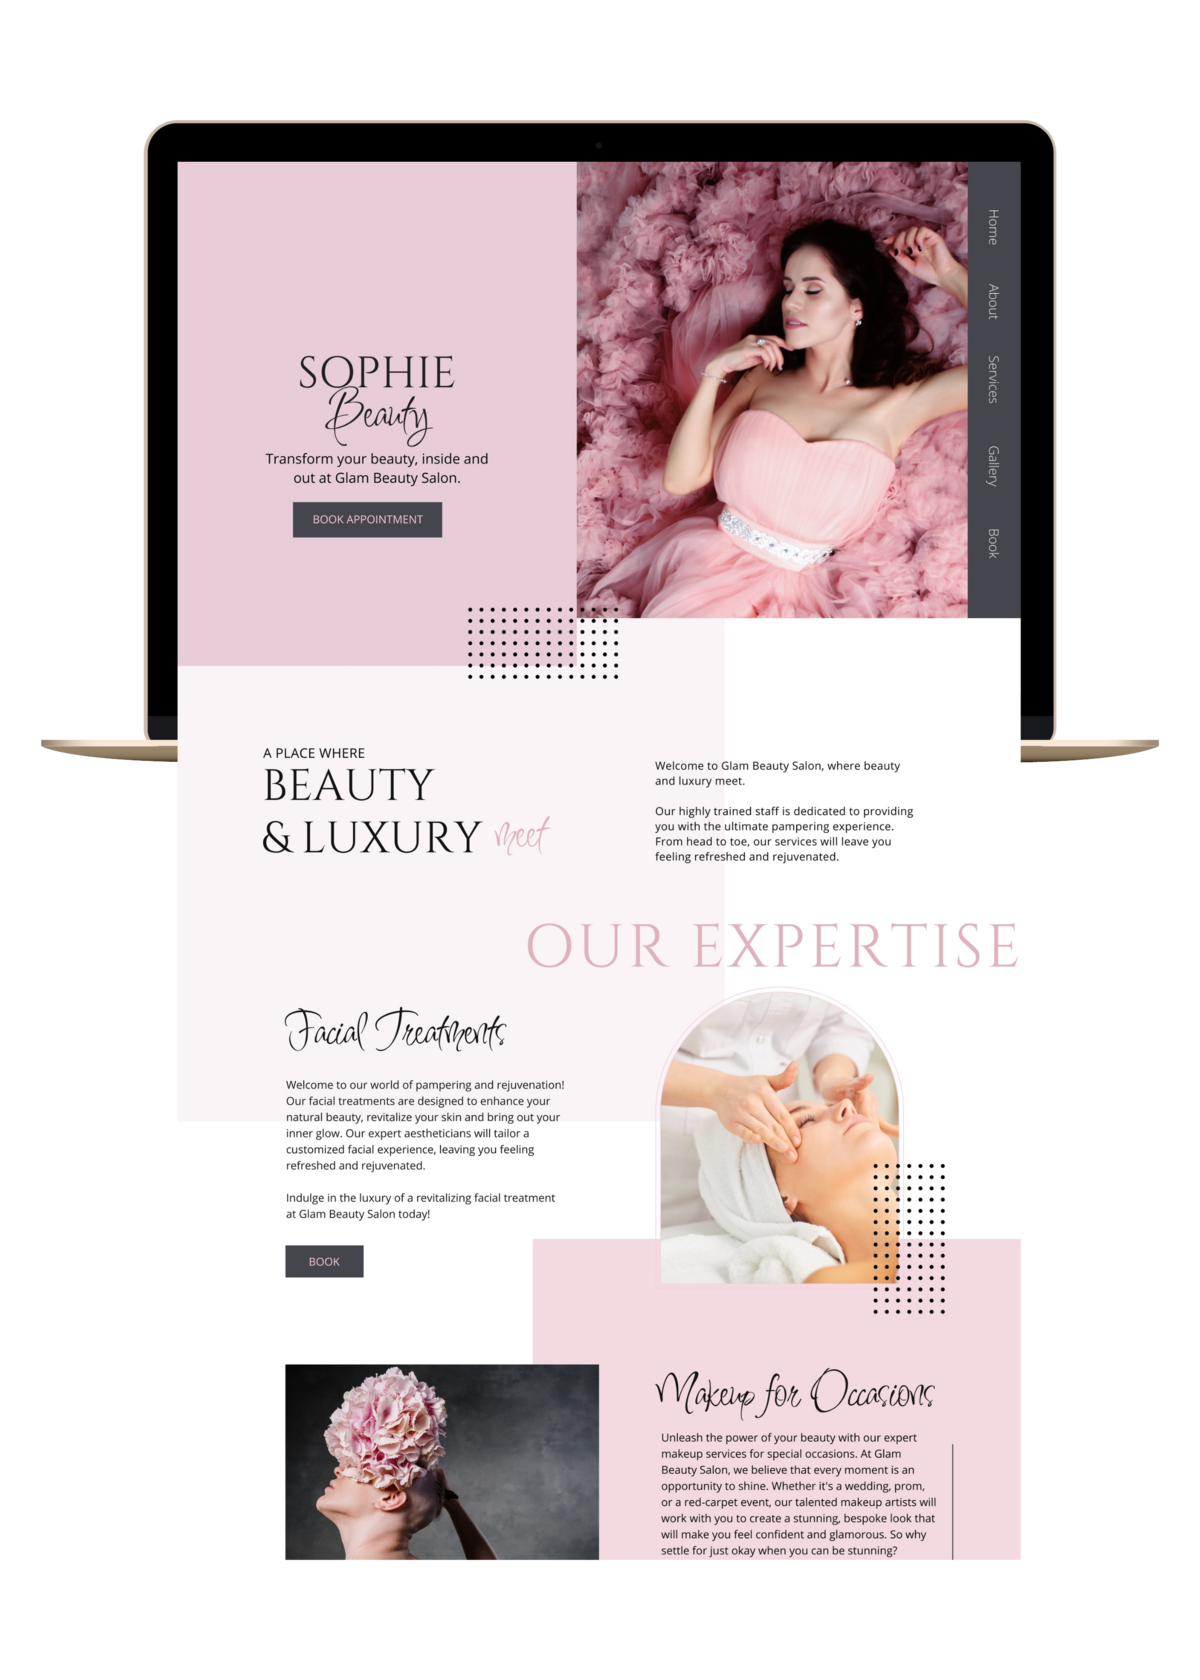 Sophie-beauty-website-template-for-showit